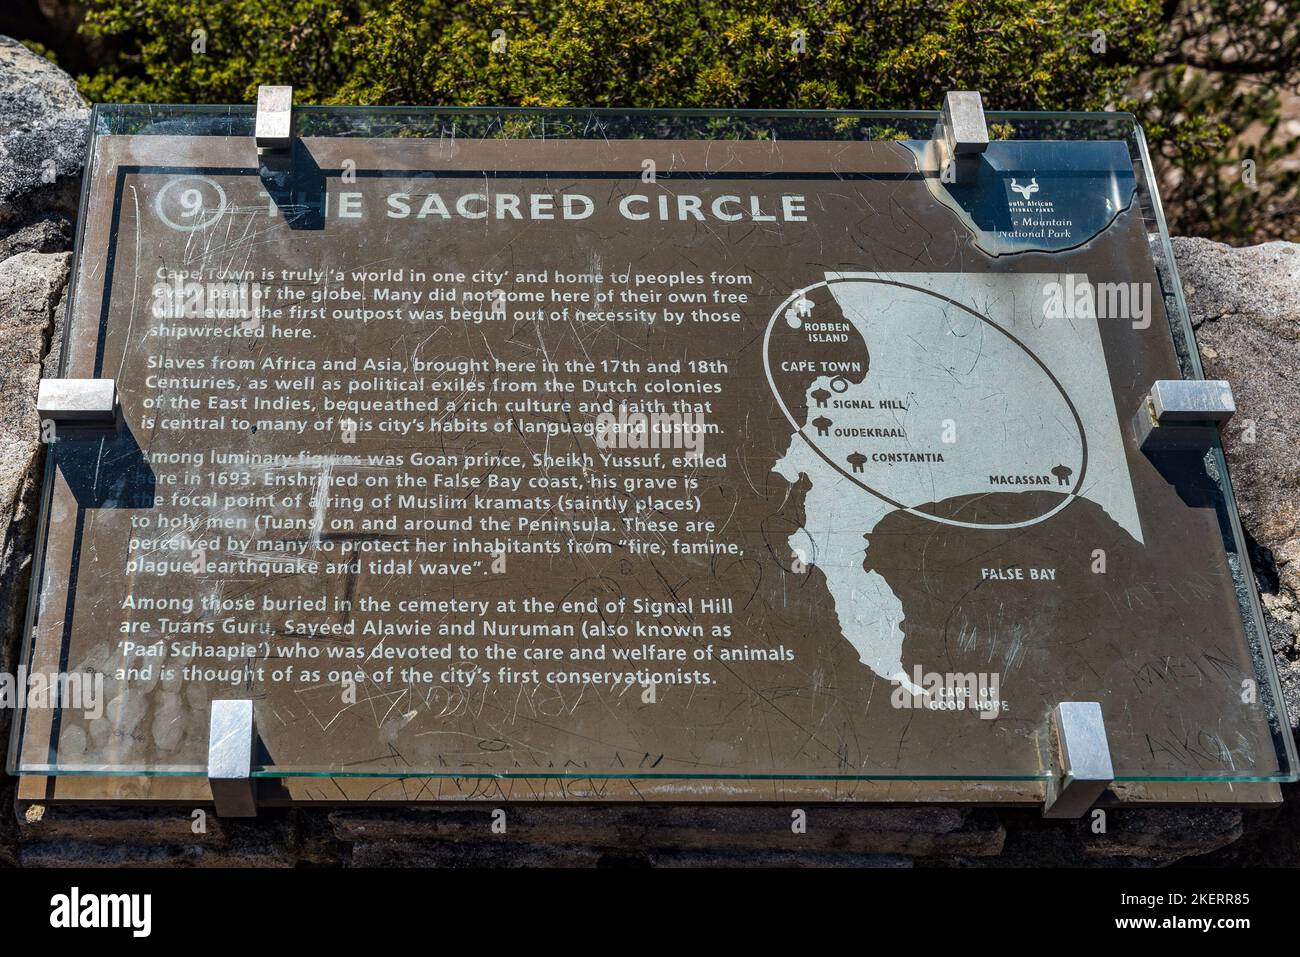 Cape Town, South Africa - Sep 14, 2022: An information board on The Sacred Circle on Table Mountain Stock Photo